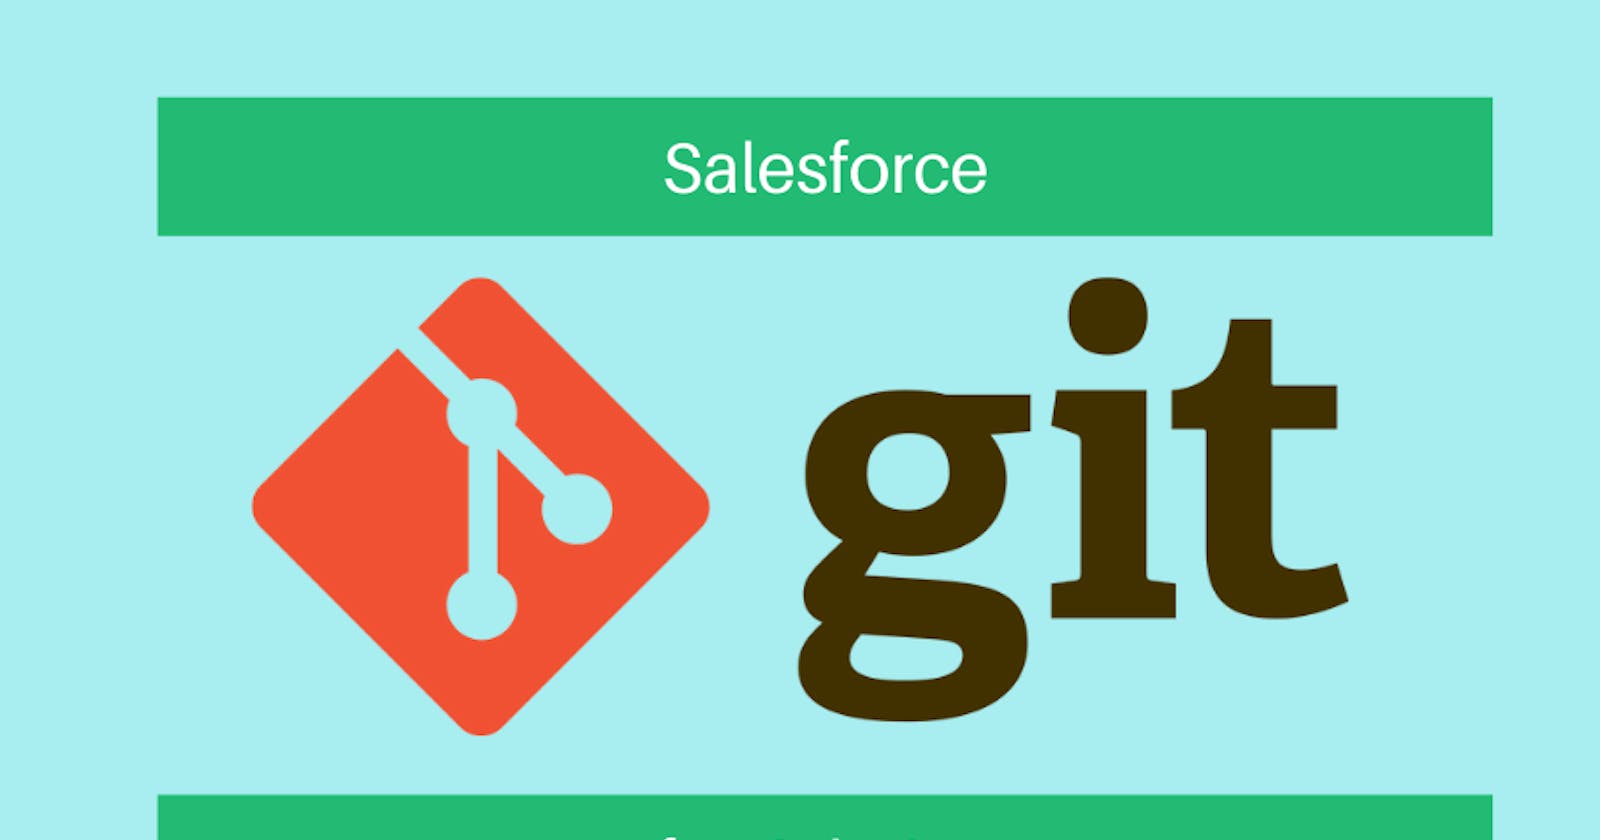 A Guide to Git and Version Control for Salesforce Admins